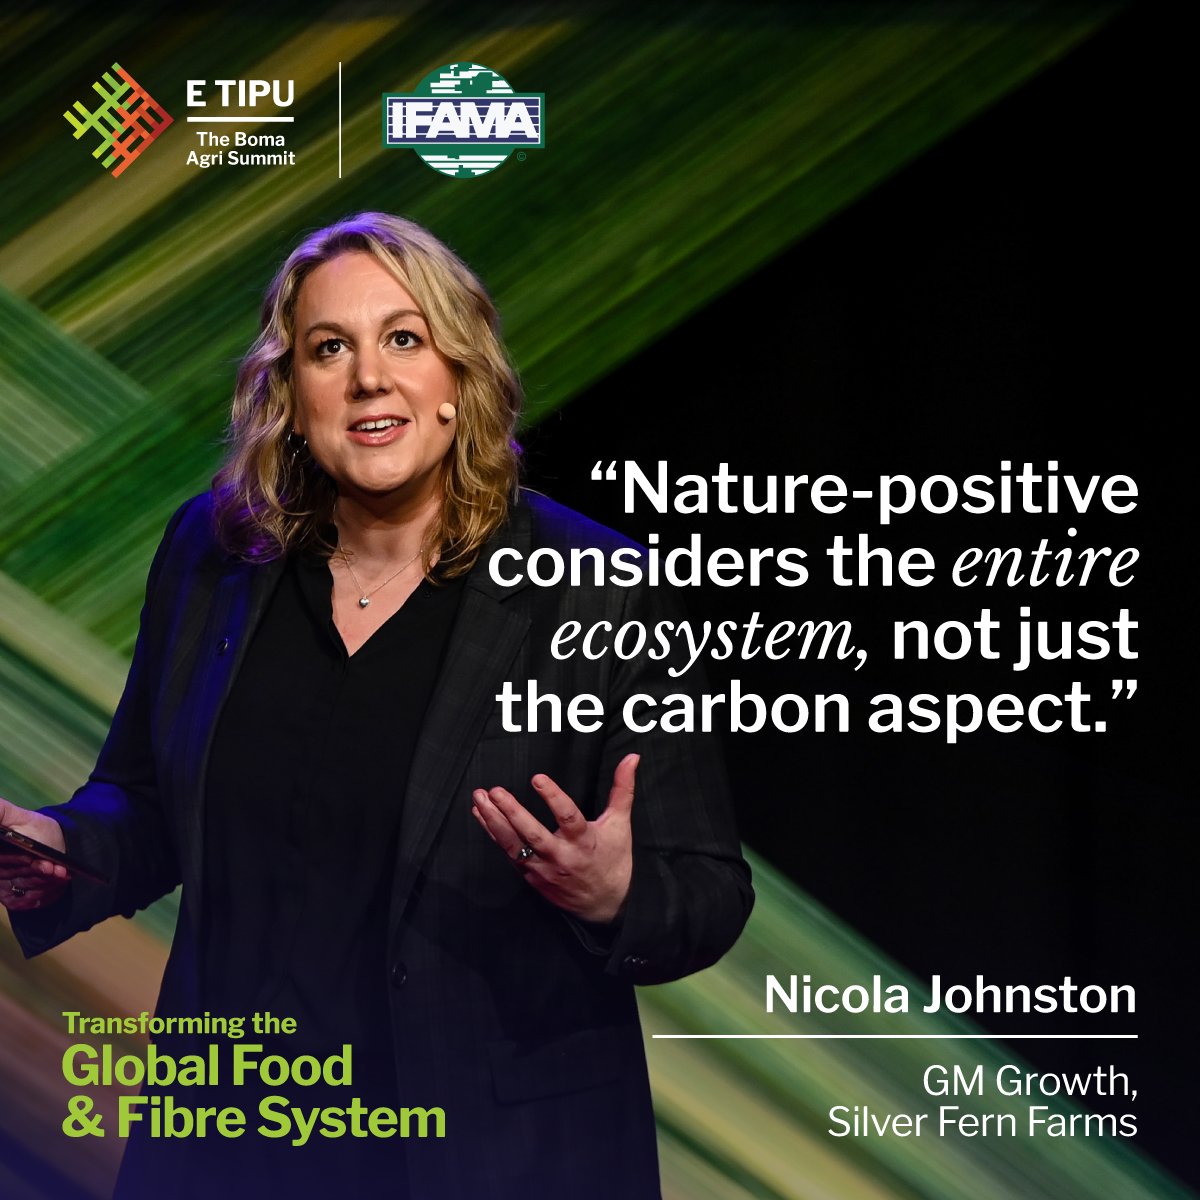 #ETipuIFAMA2023 SPEAKER HIGHLIGHT: Nicola Johnston of @silverfernfarms believes NZ has a once in a generation opportunity to position itself as the world’s leading nature-positive food producer. #BomaNZ #NZBusiness #NZAgri @IFAMAIntl #NZAgri #NaturePositive #RegenerativeAg